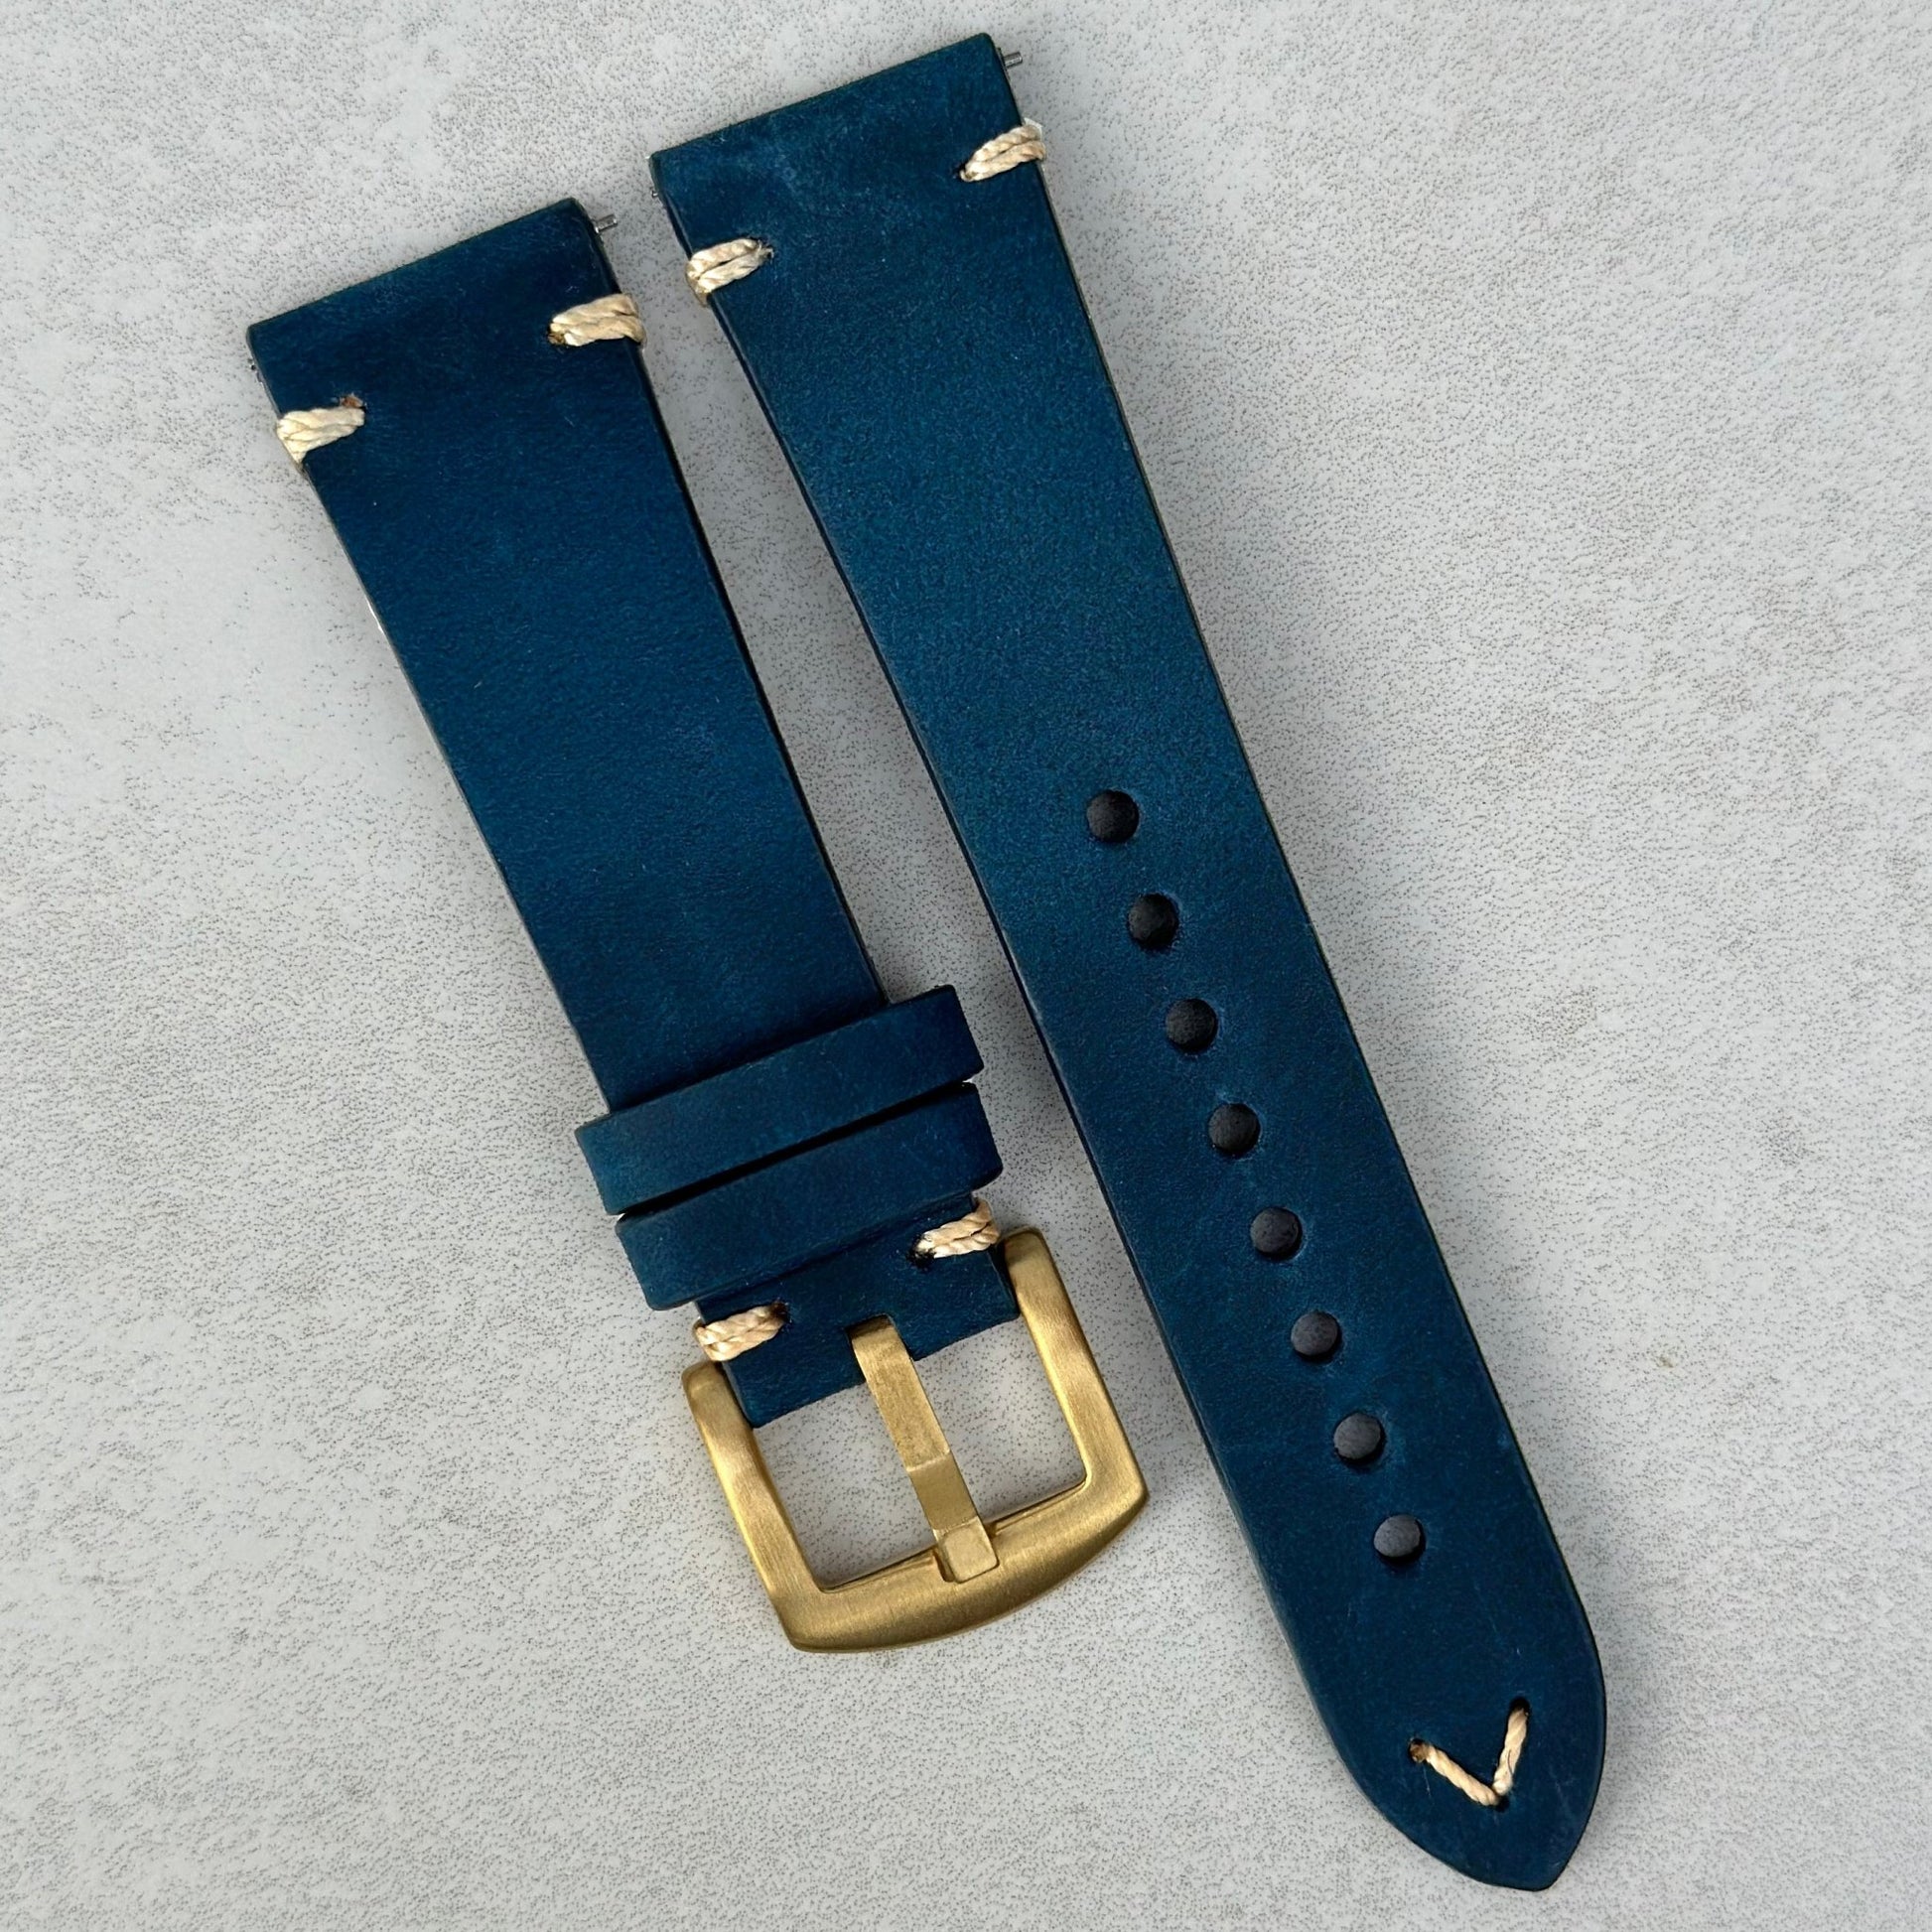 Madrid midnight blue full grain leather watch strap. PVD gold 316L stainless steel buckle. Contrast ivory stitching.